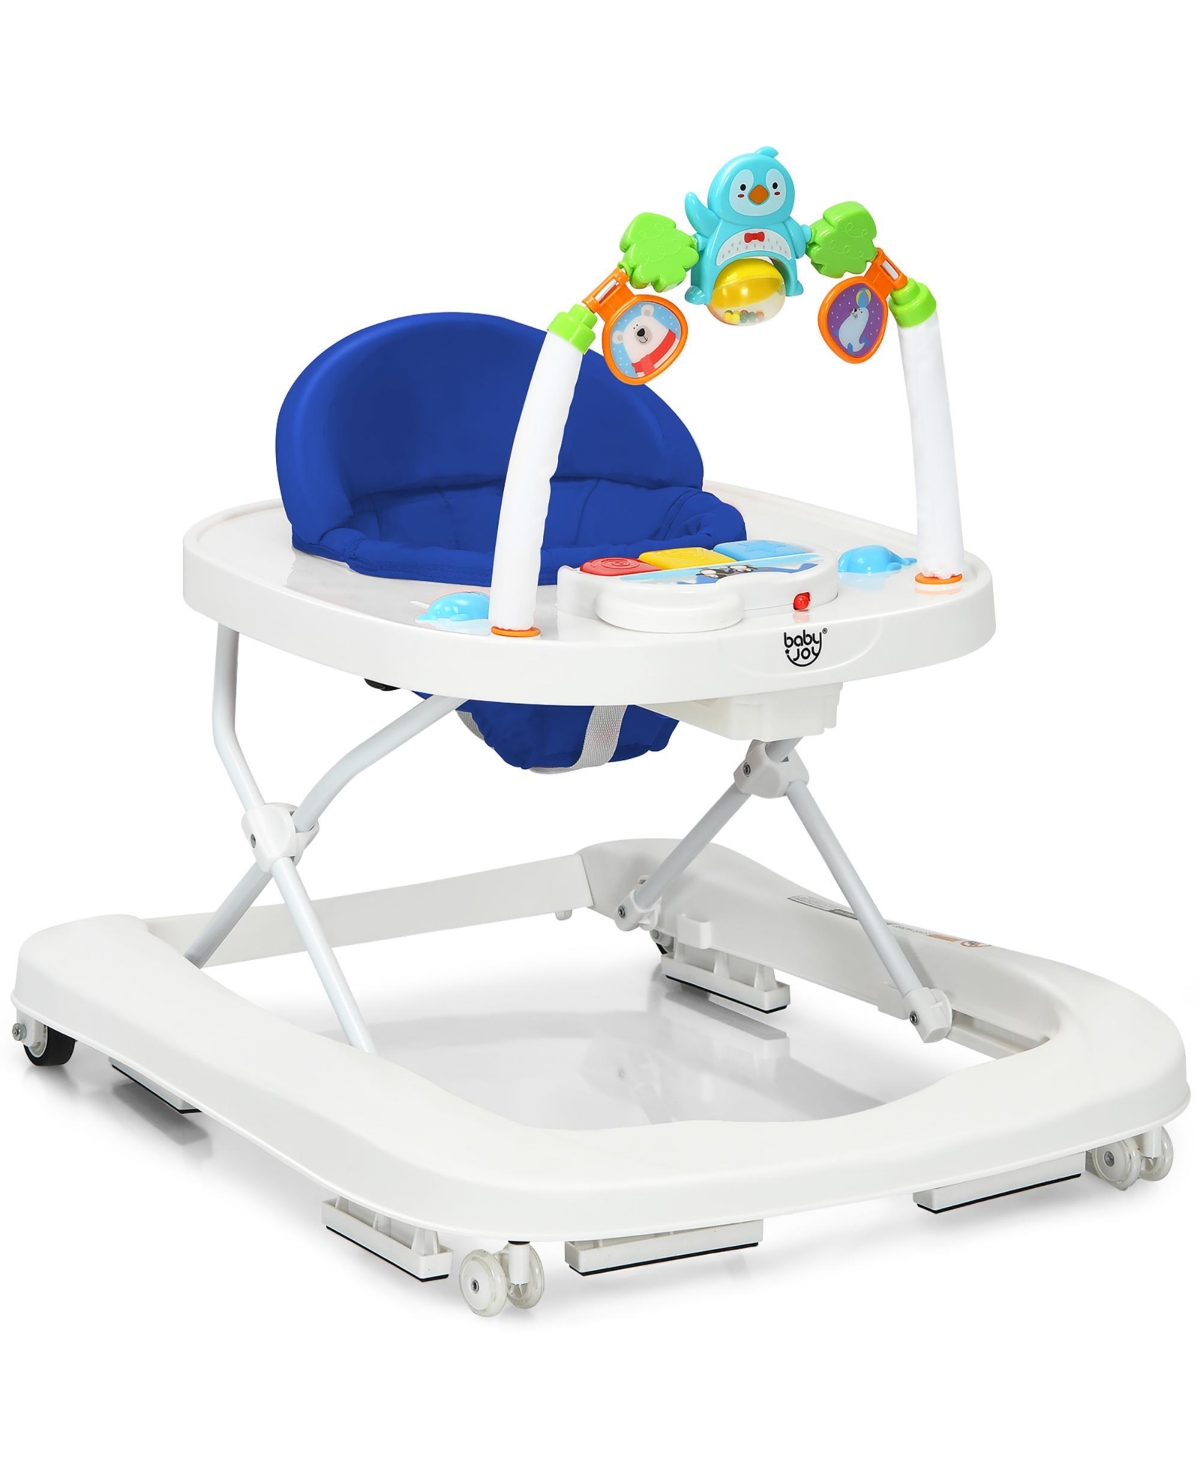 Costway 2-in-1 Foldable Baby Walker W/ Adjustable Heights & Detachable Toy Tray In Blue